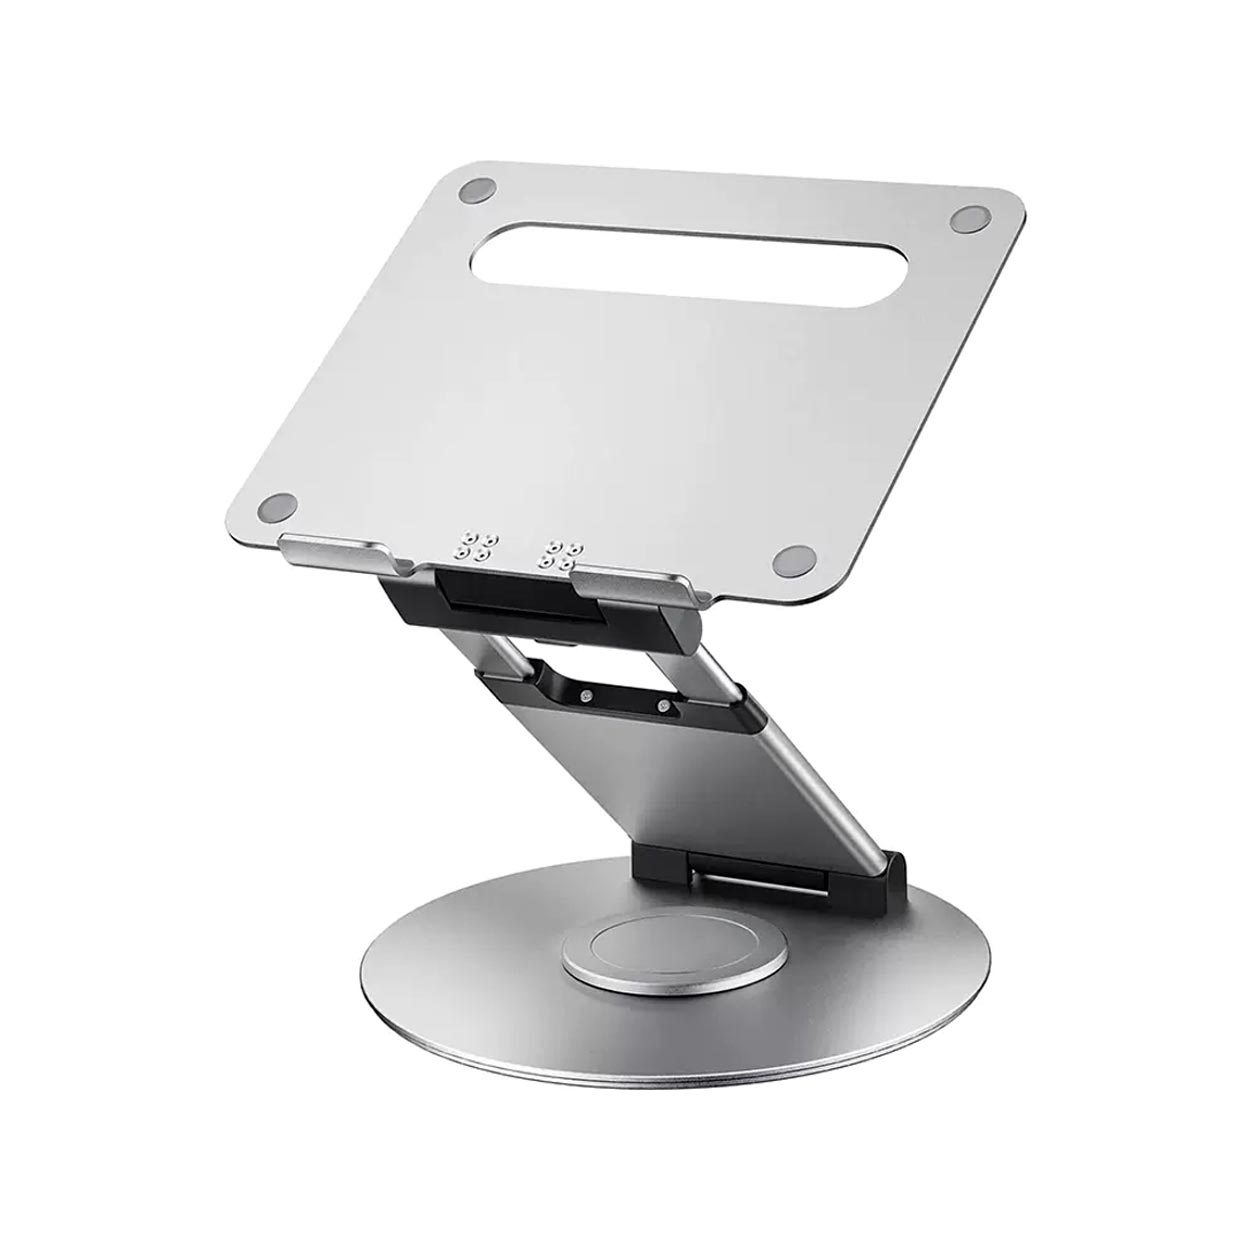 Ergonomic Laptop Stand with 360 Rotating Base and Adjustable Height